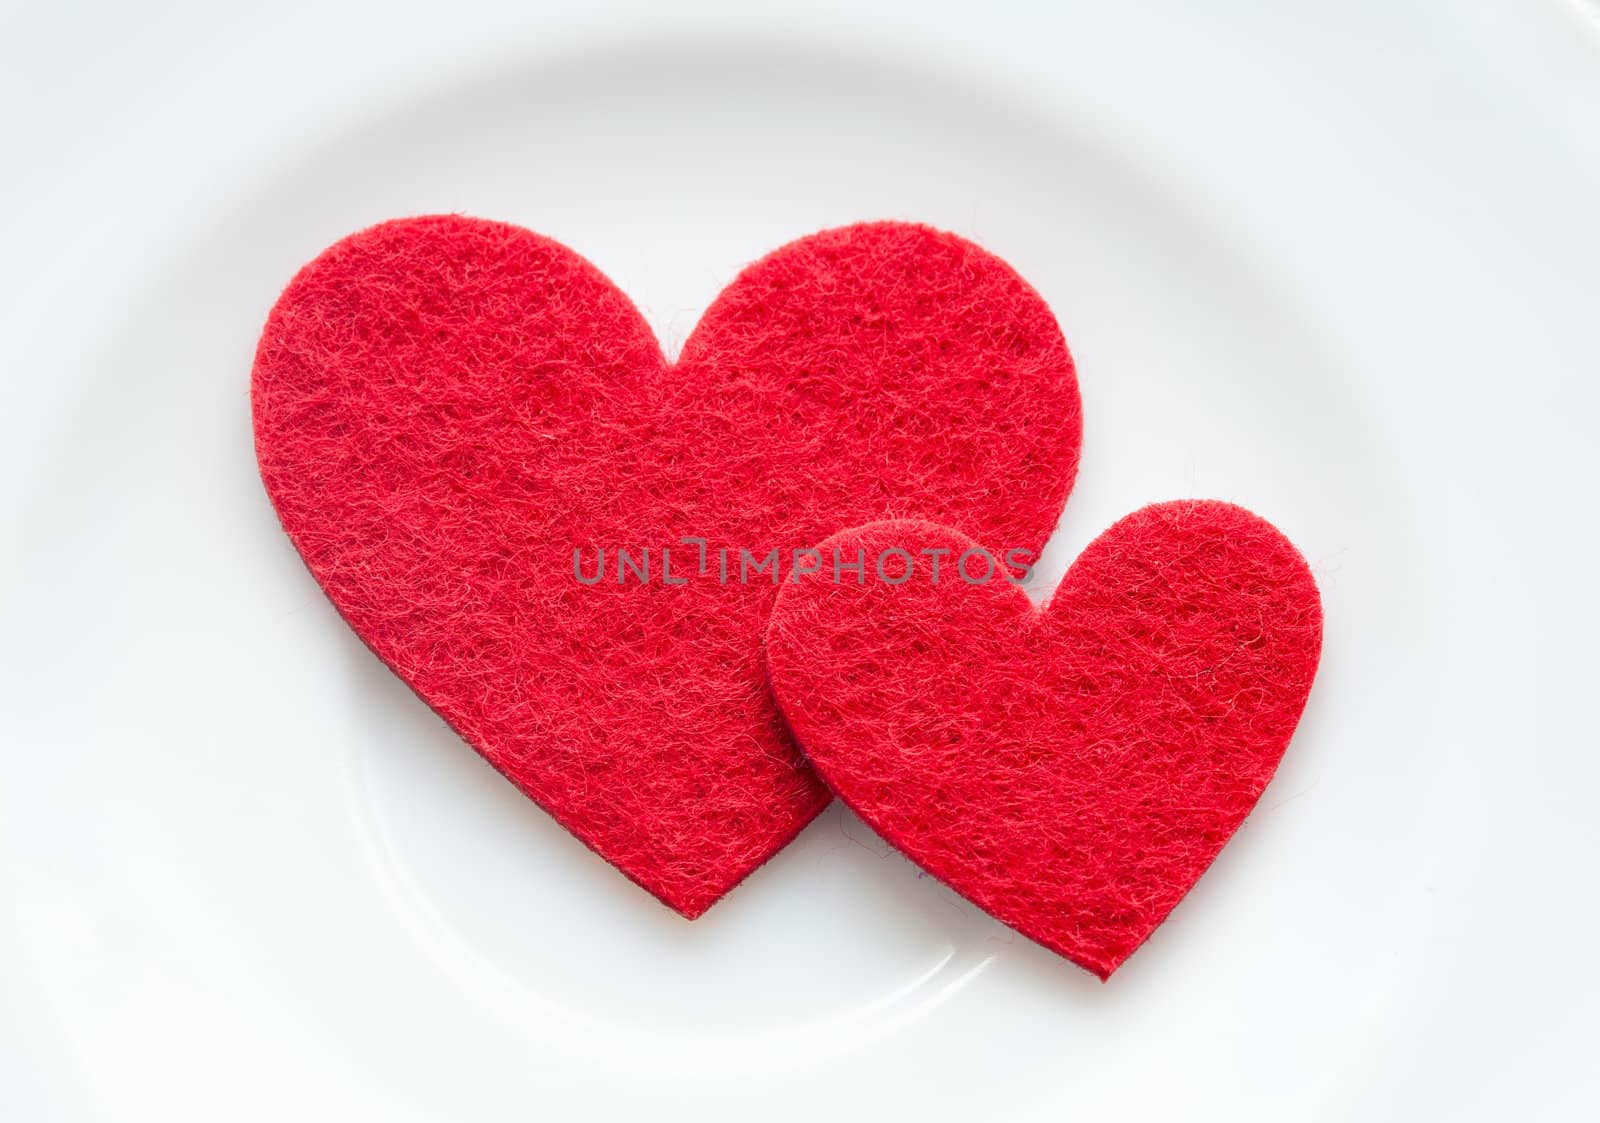 Red hearts on a plate close-up. Valentine's Day by sfinks